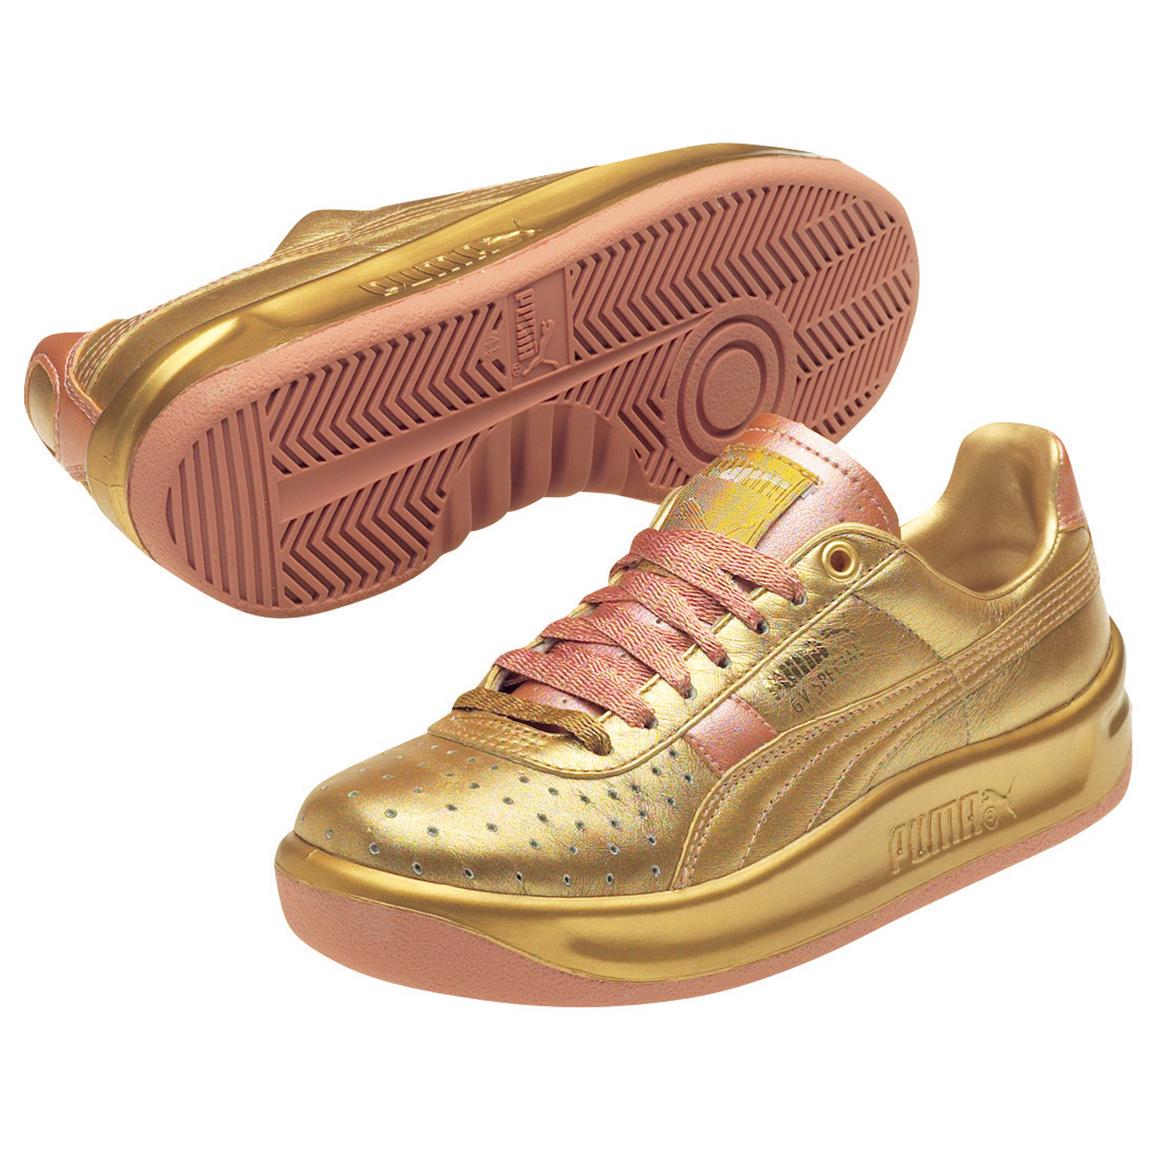 Gold Shoes : dsquared gold wedding shoes | OneWed.com